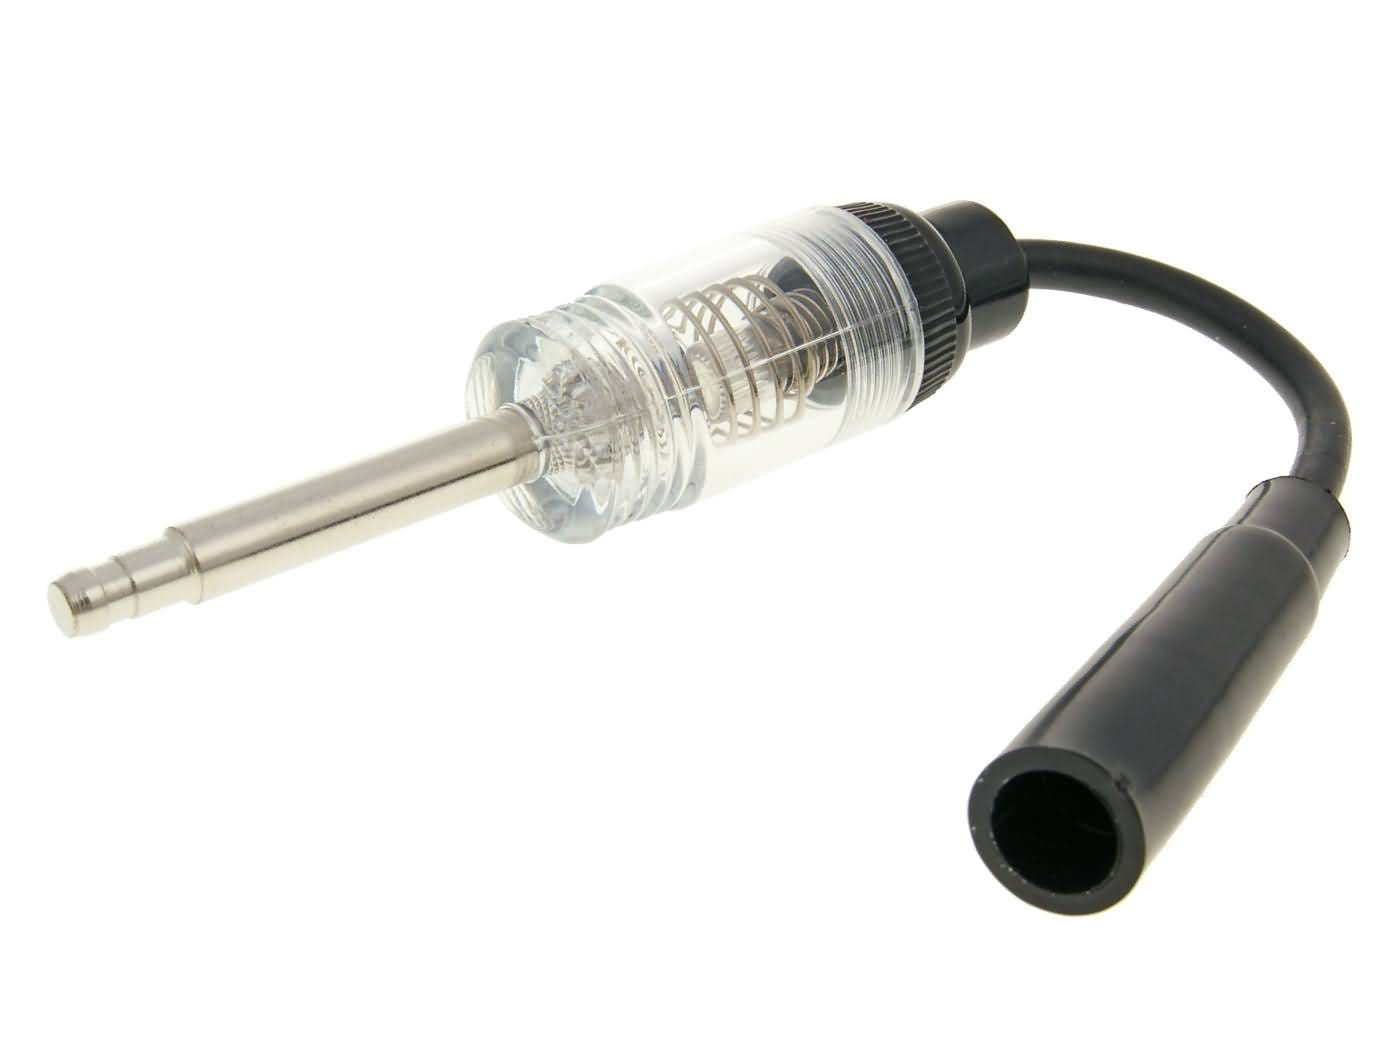 Ignition coil tester